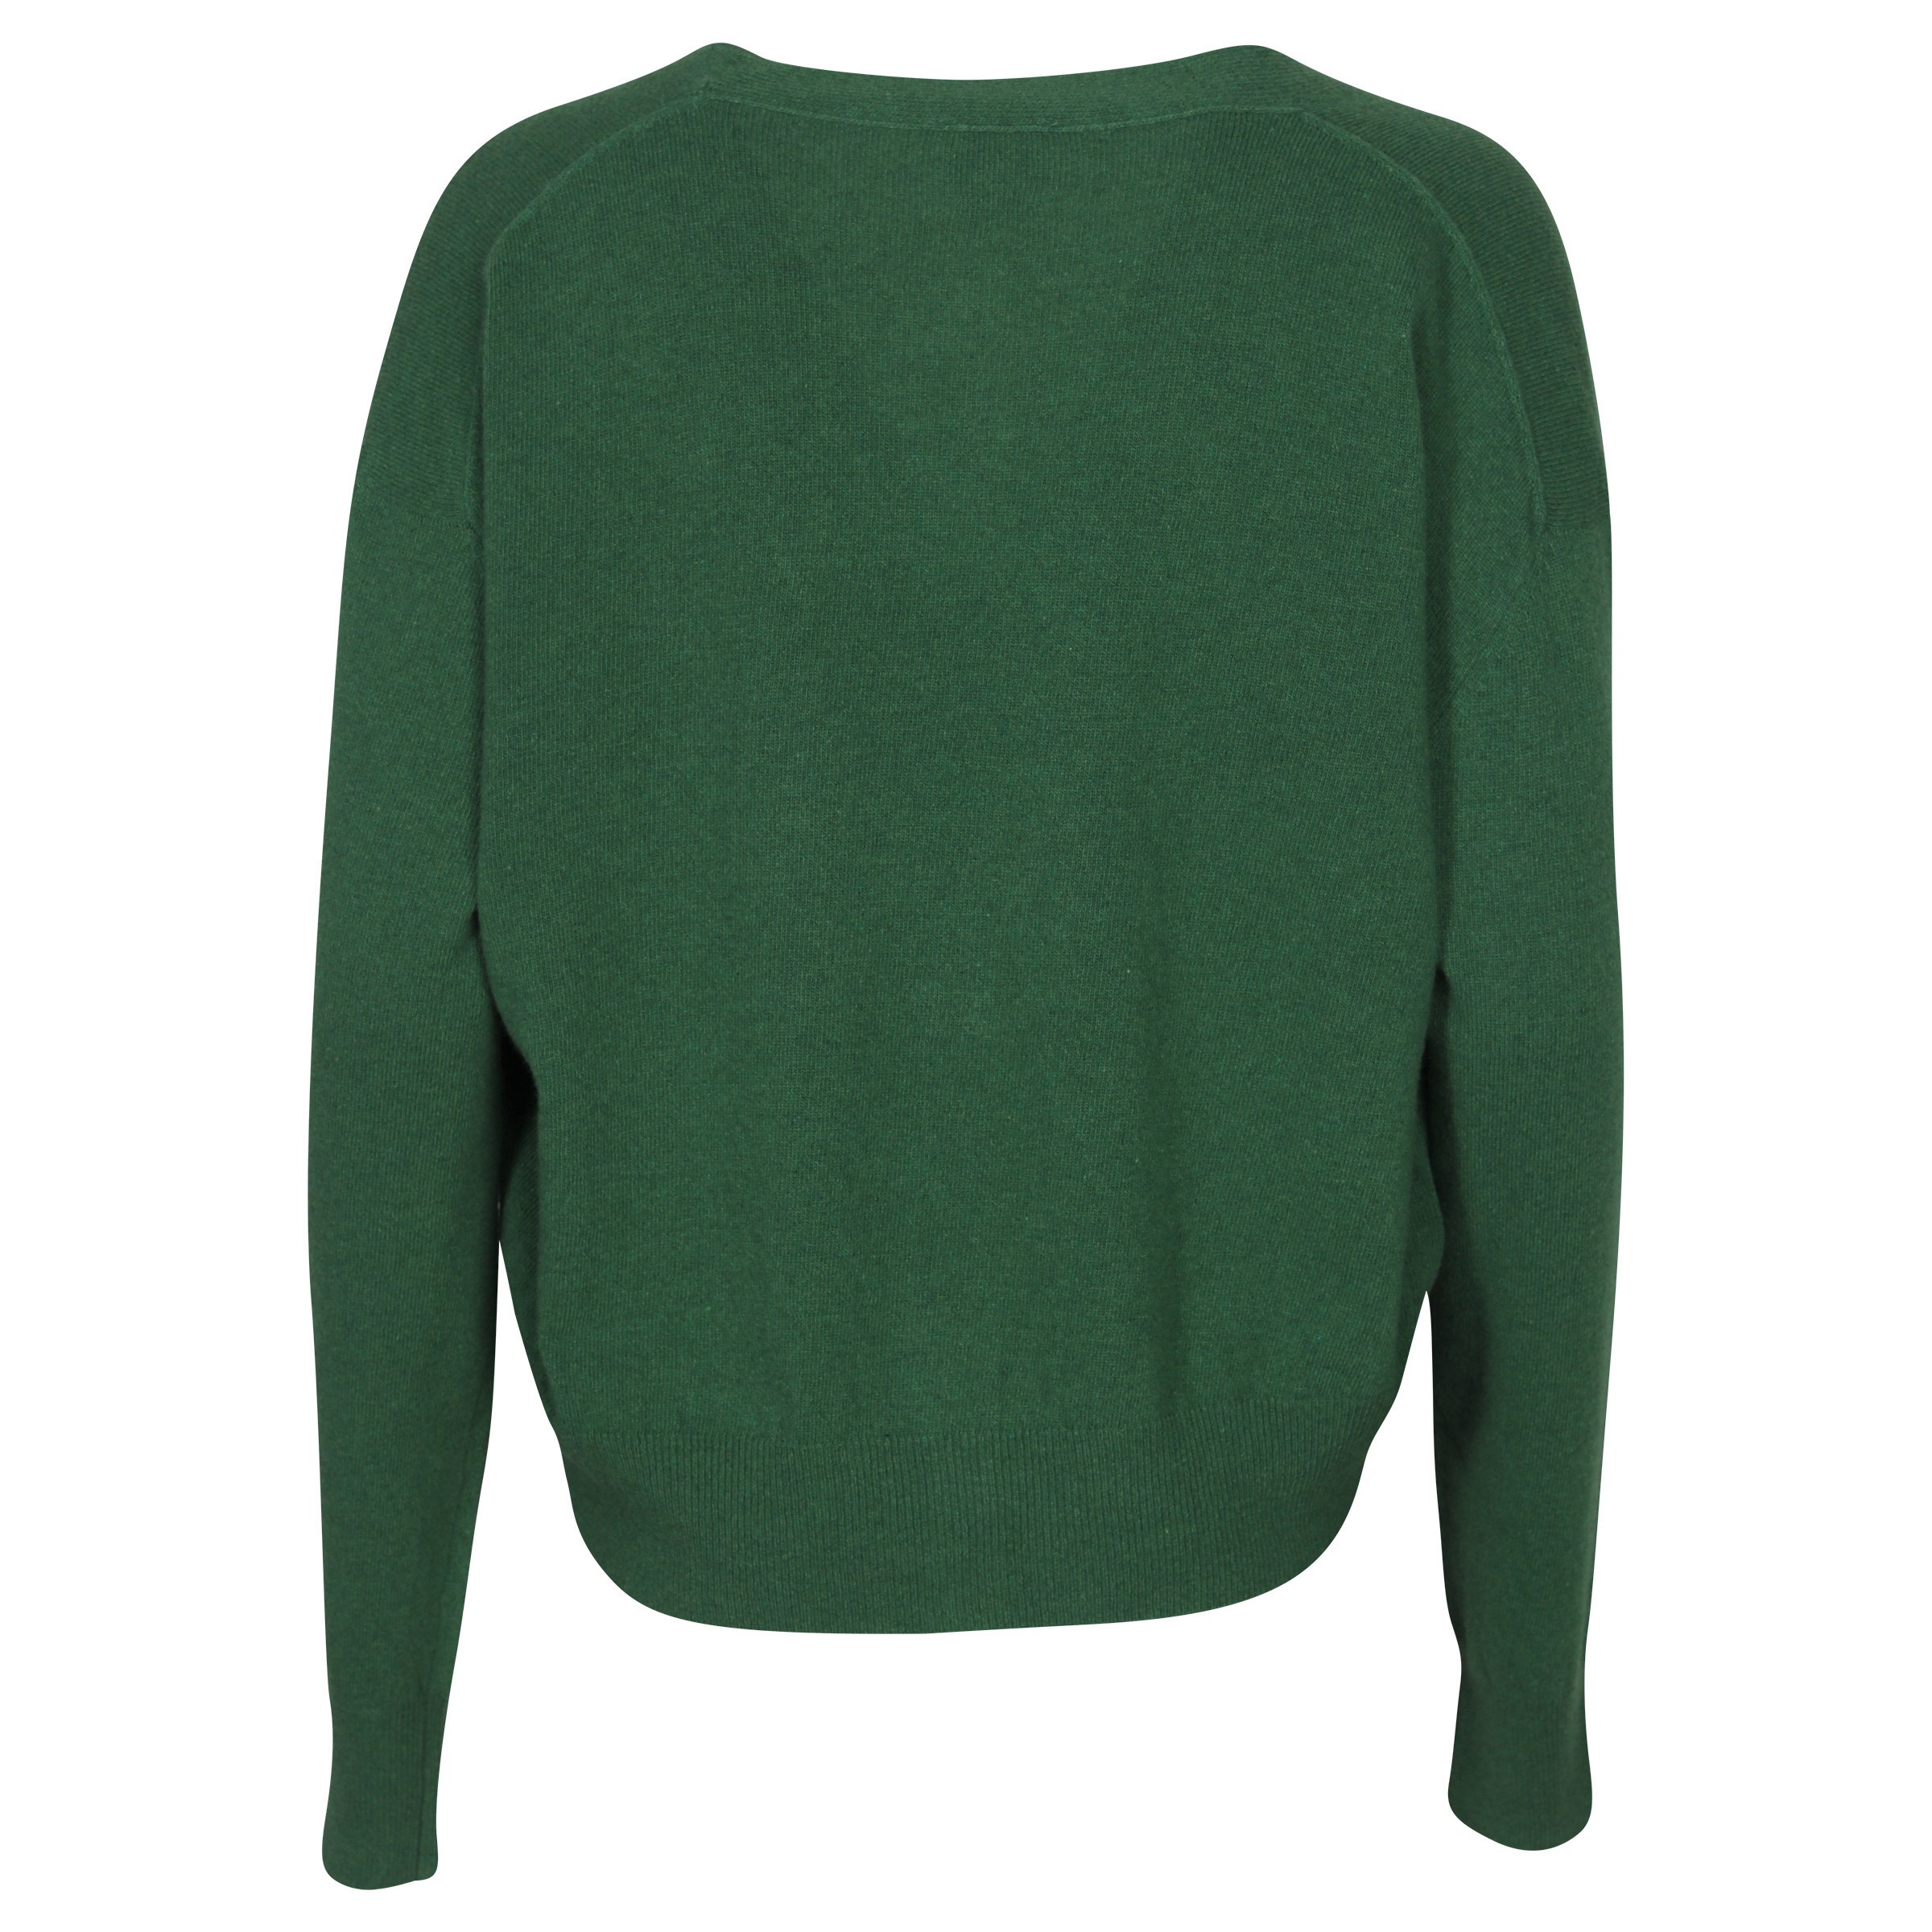 Phiili Recycled Cashmere Cardigan in Green XS/S